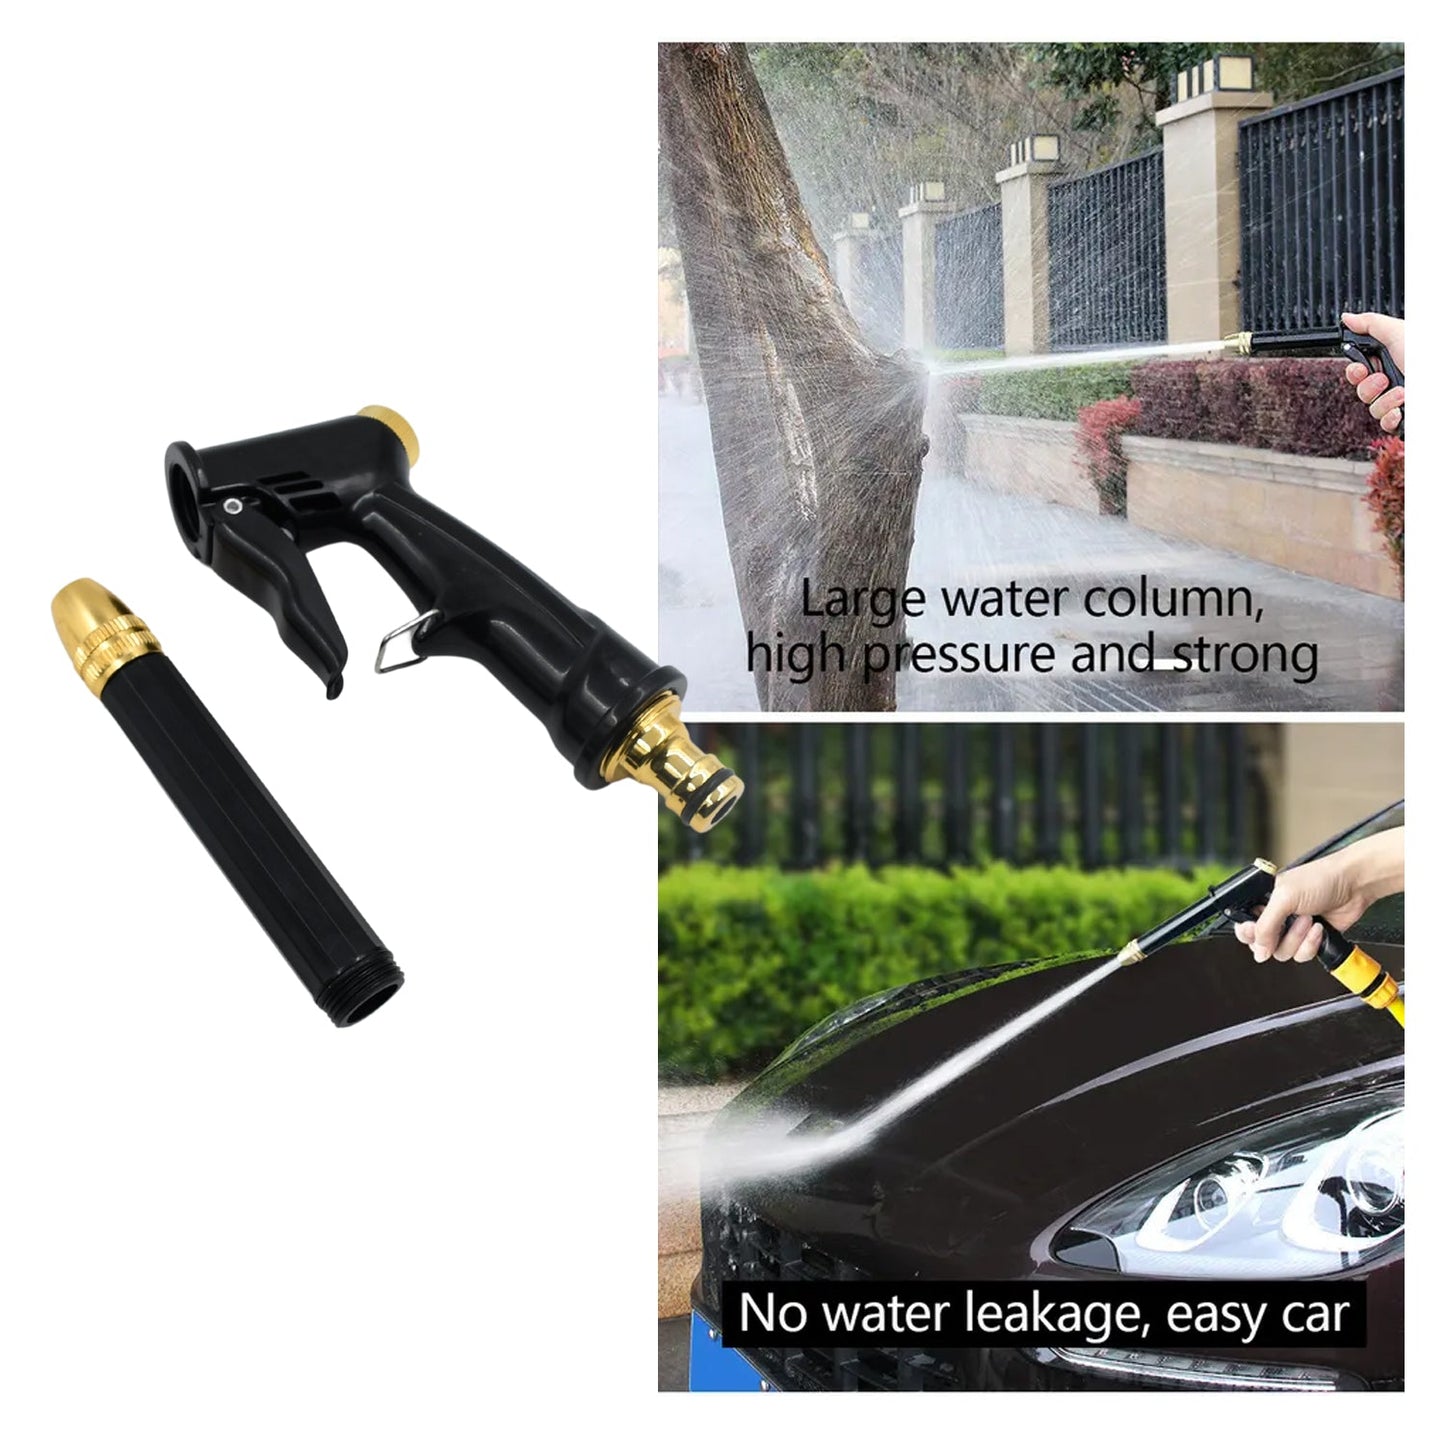 9148 Plastic Body, Metal Trigger & Brass Nozzle Water Spray Gun For Water Pipe | Non-Slip | Comfortable Grip | Multiple Spray Modes | Ideal Pipe Nozzle For Car Wash, Gardening,& Other Uses